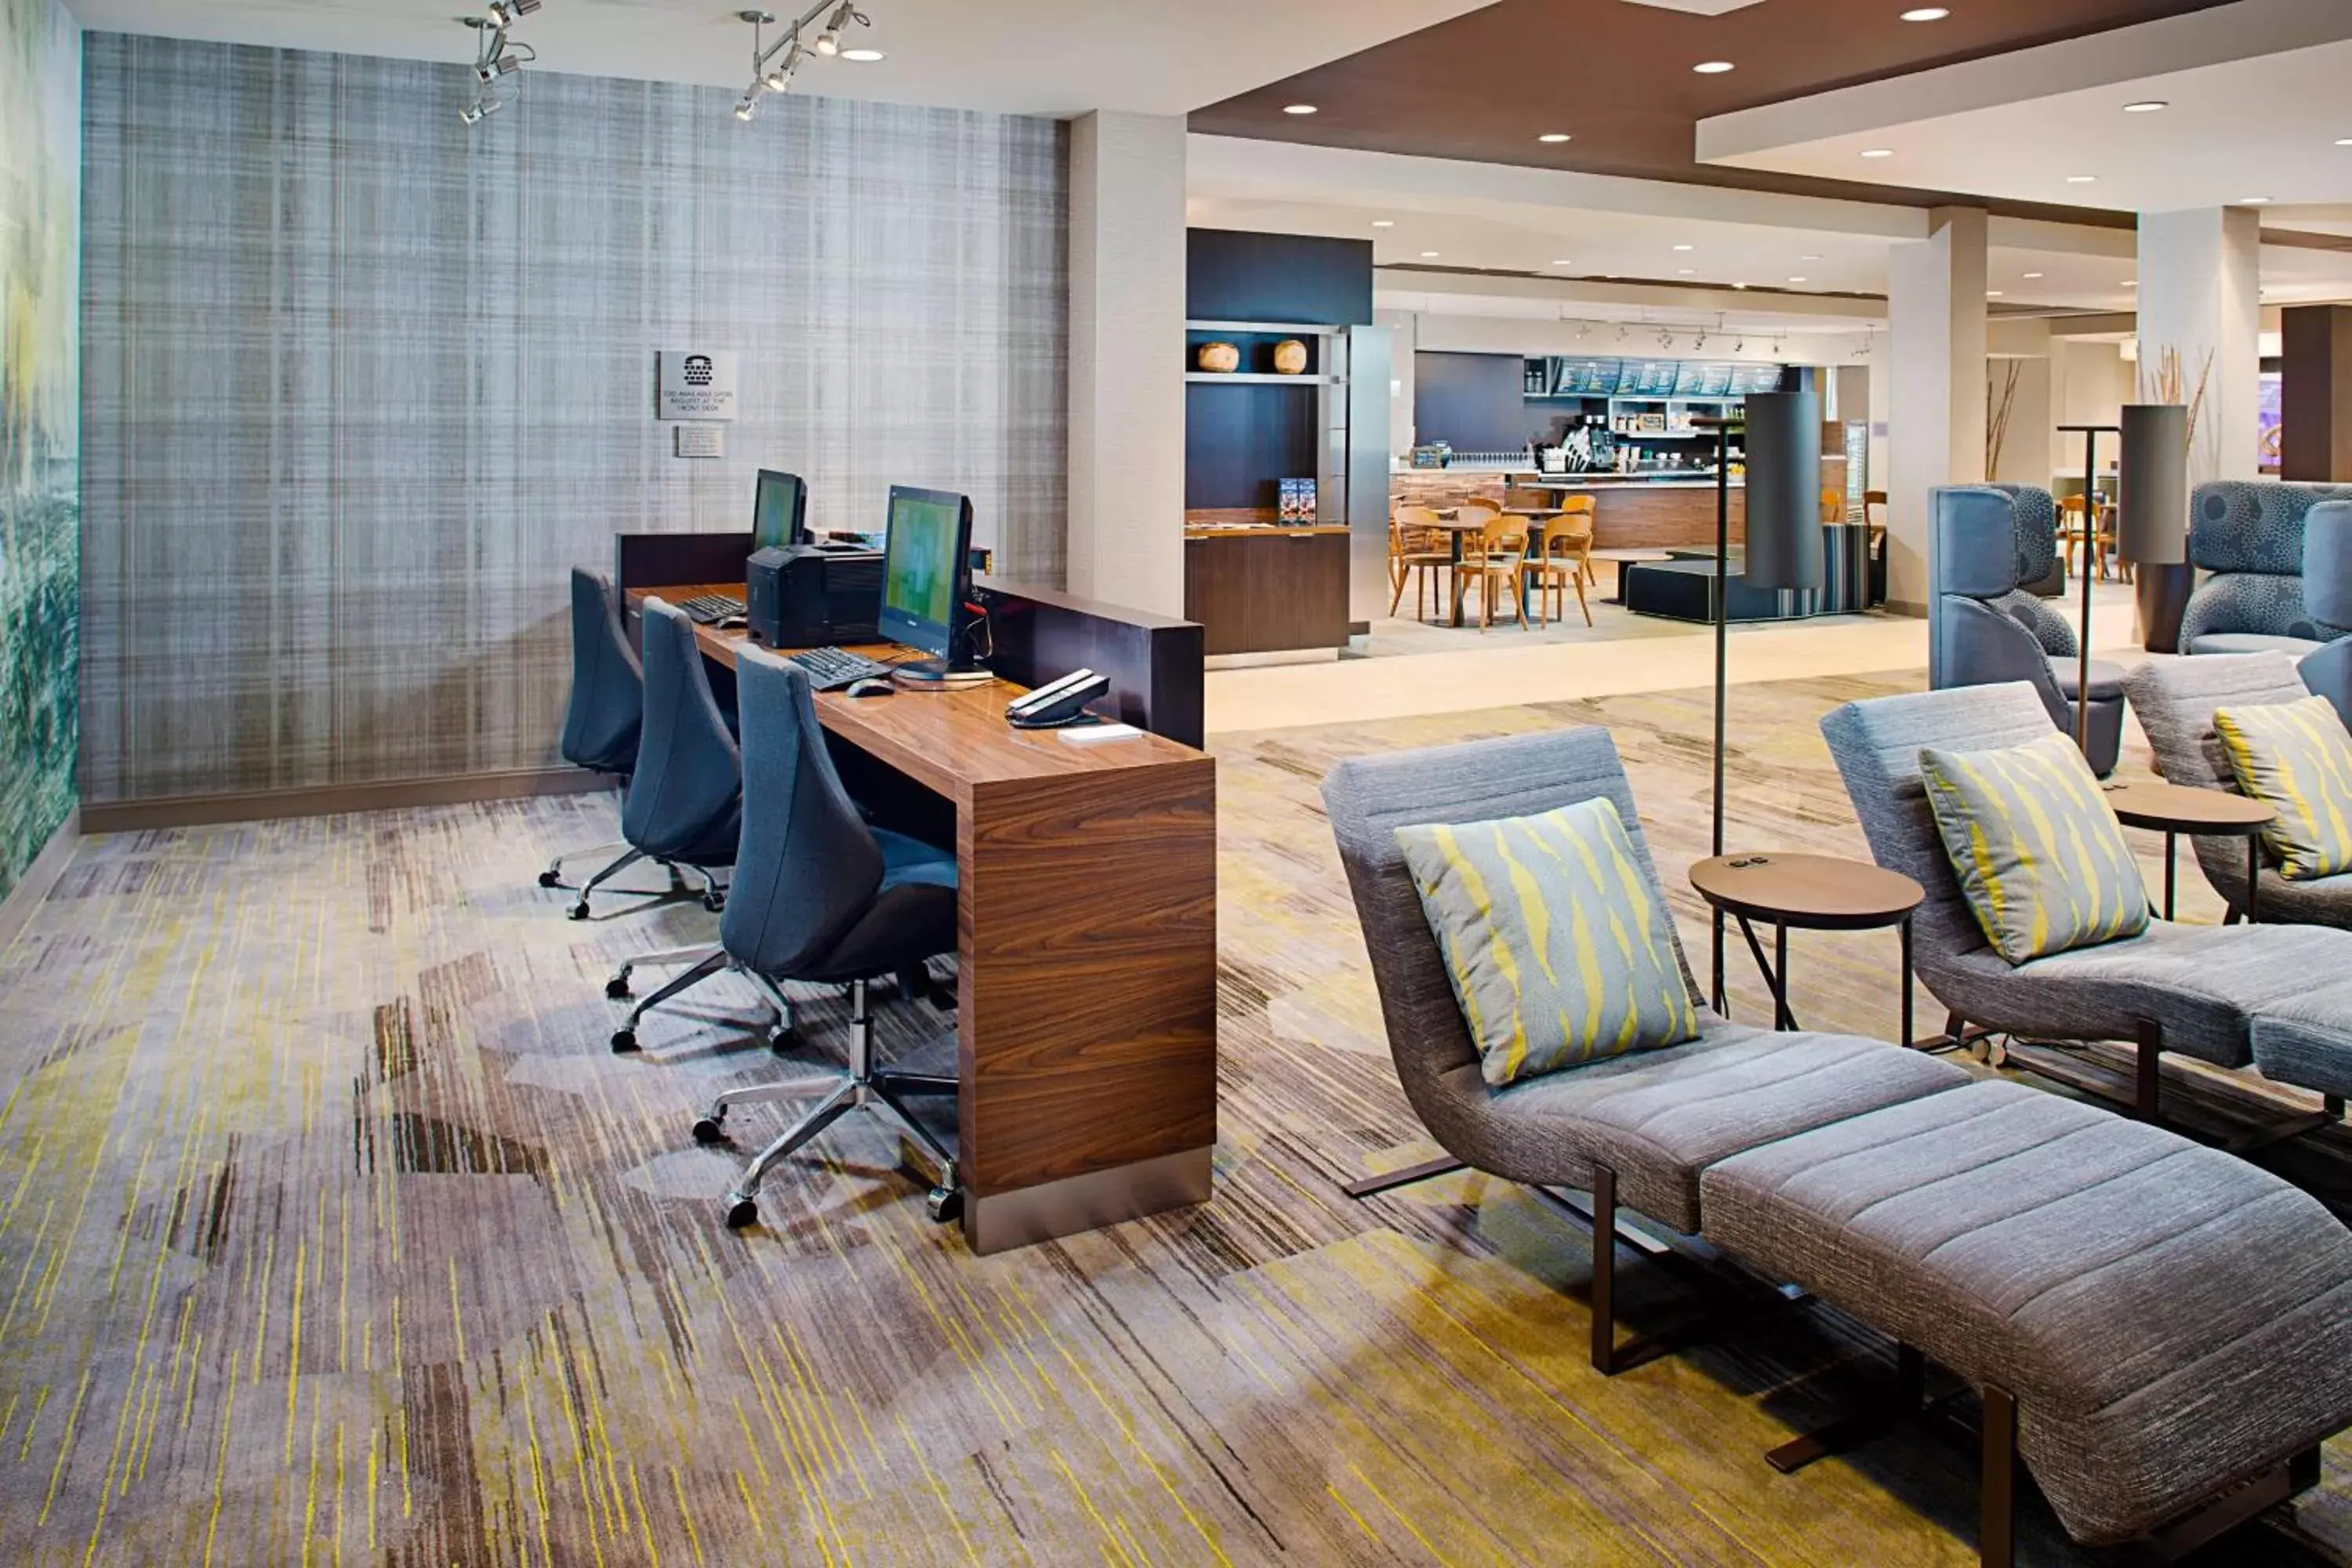 Business facilities in Courtyard by Marriott Dallas Carrollton and Carrollton Conference Center